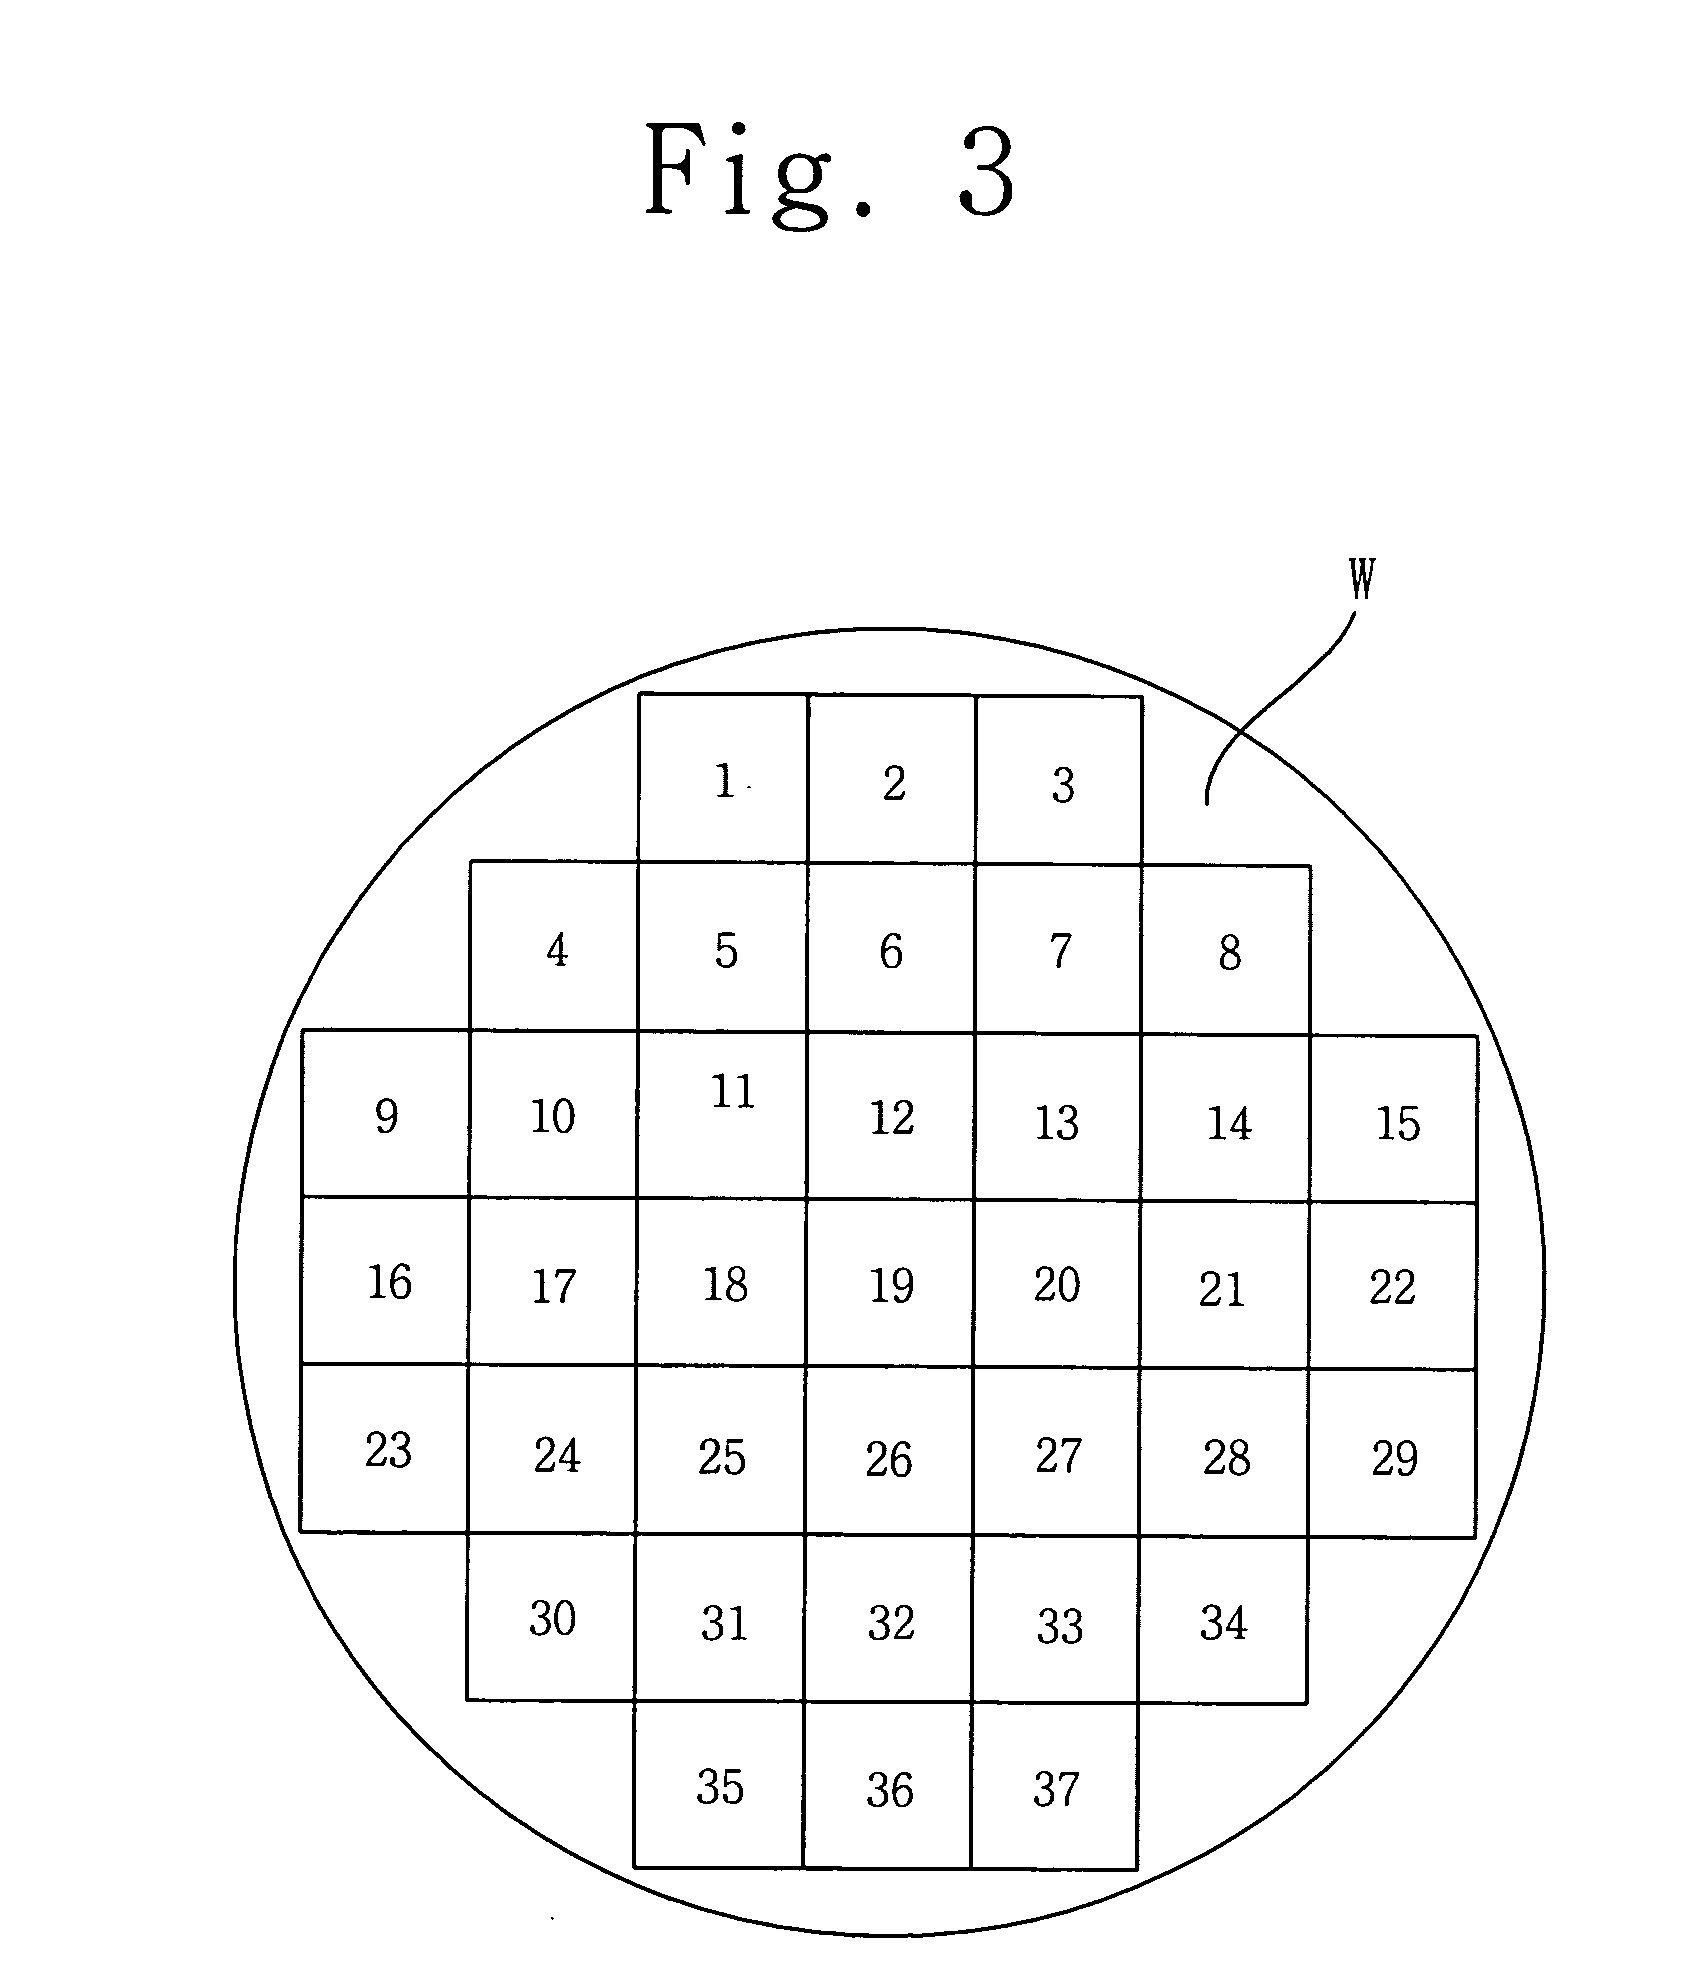 Imprinting apparatus with independently actuating separable modules